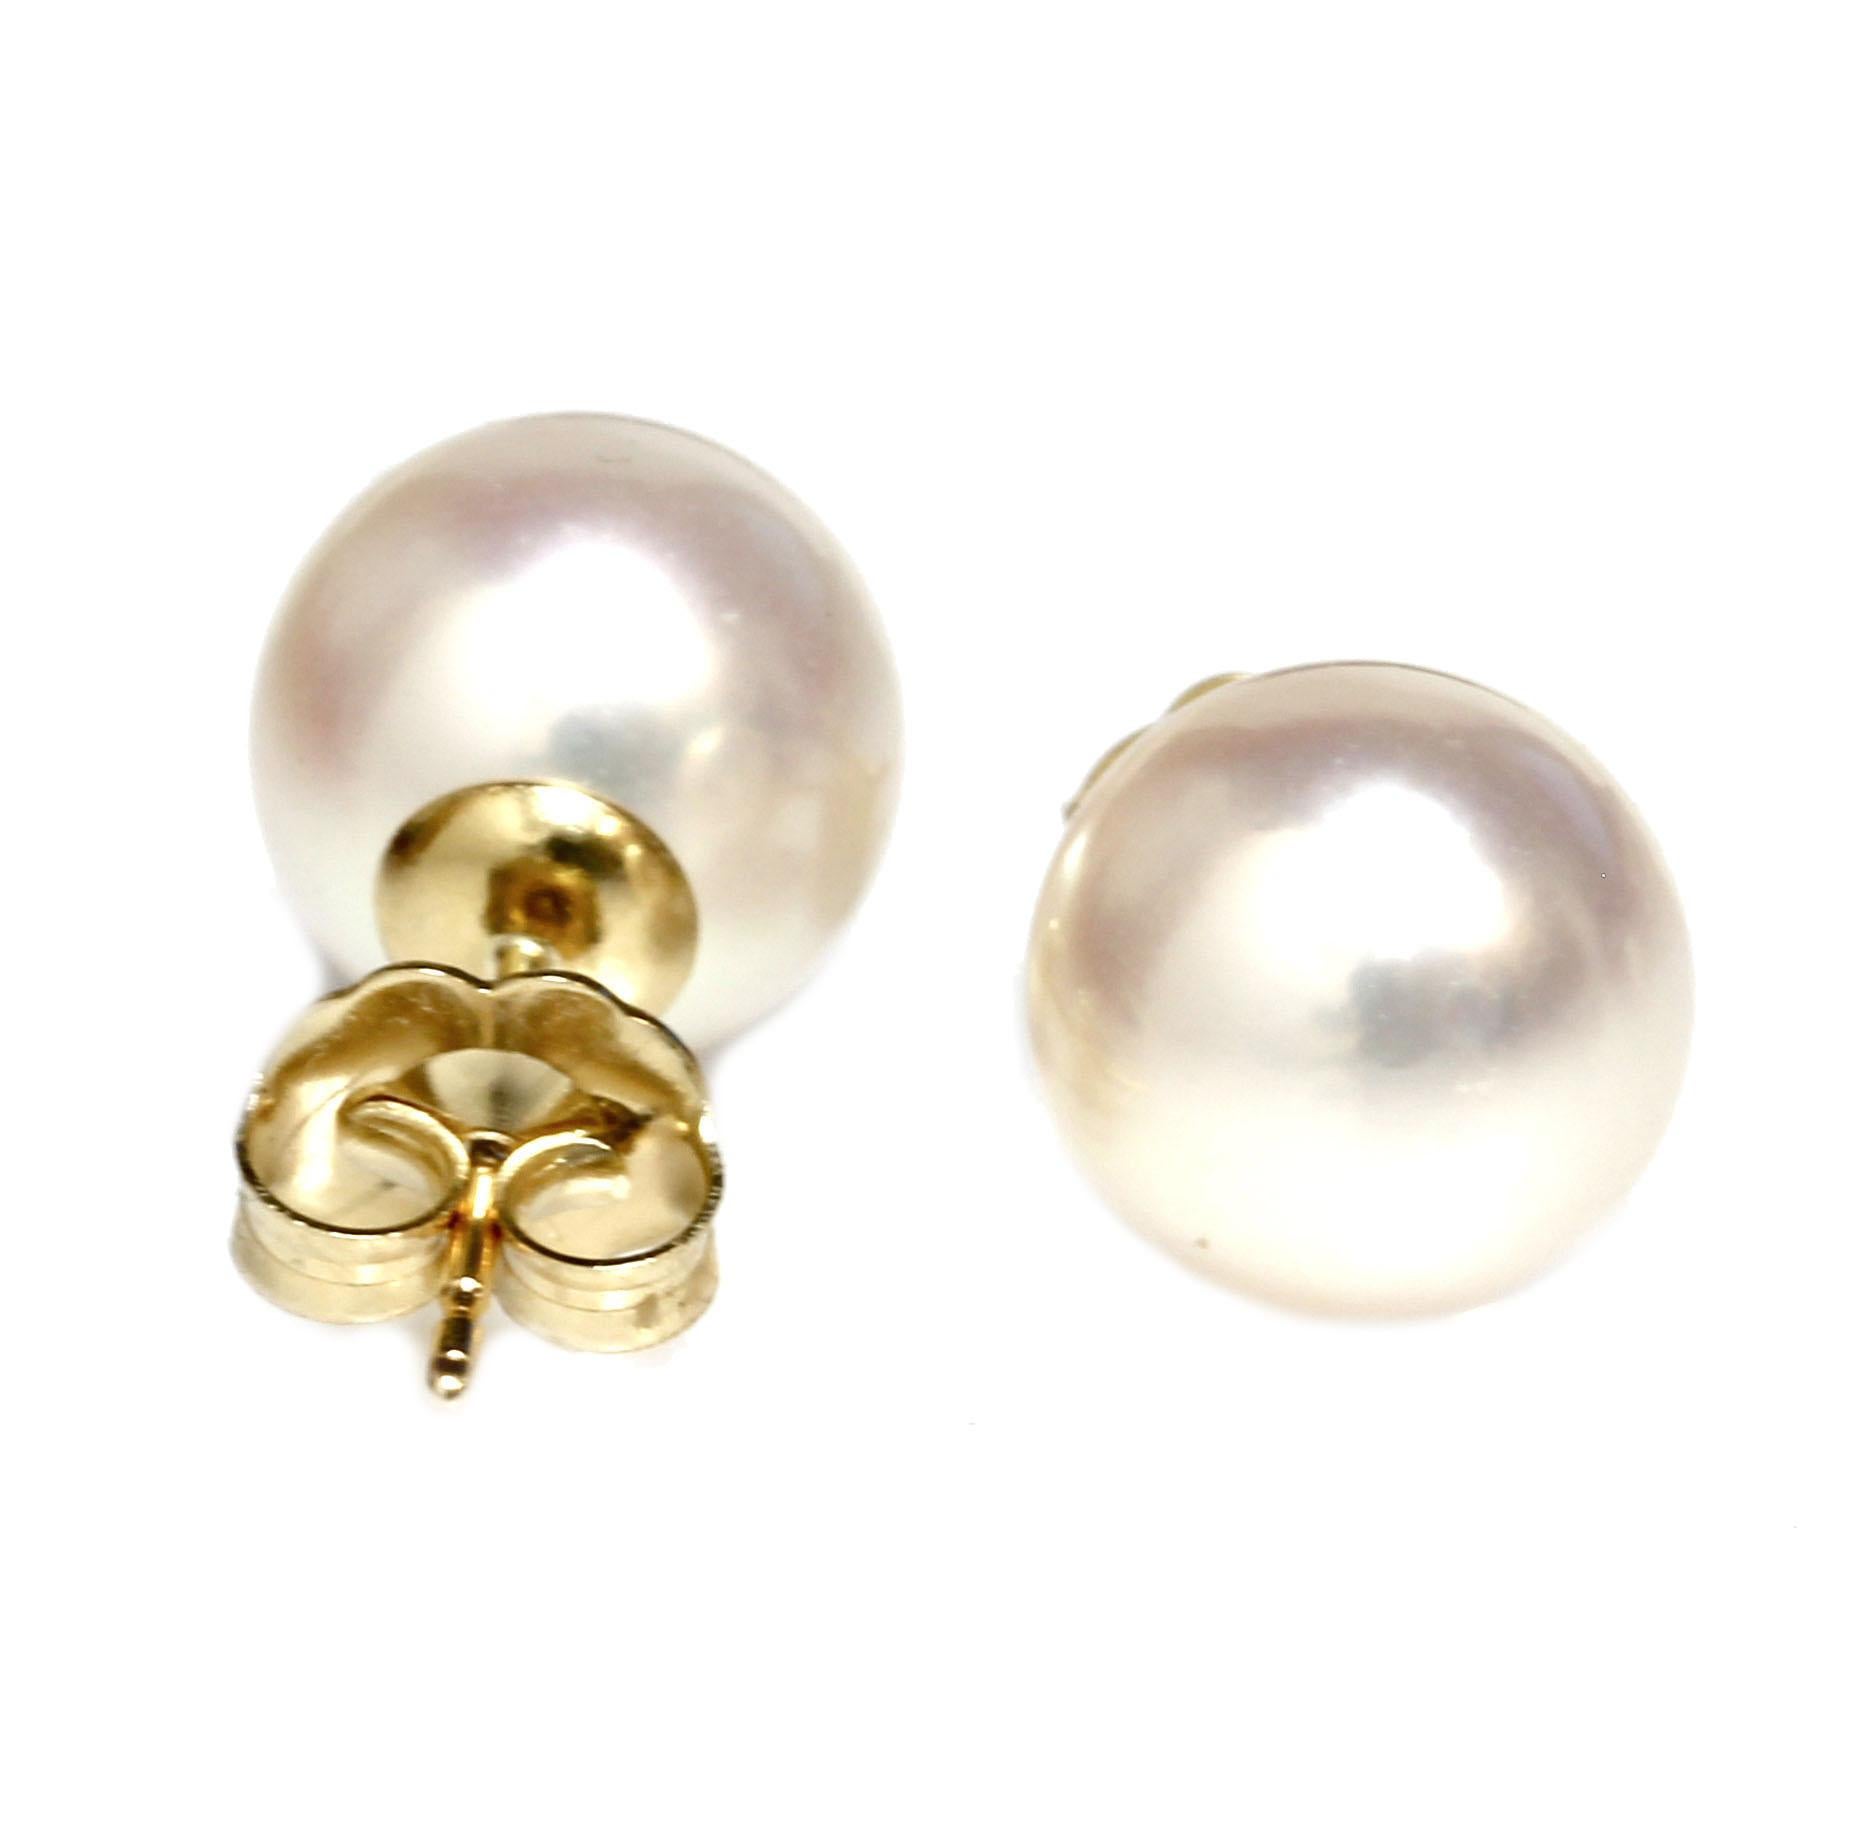 Our traditional classic saltwater akoya pearl stud earrings, the size is 9 - 8.5mm with top luster and nacre. They are flawless in surface clarity.  They are perfect round pearls with perfect classic white in color . They are set in 14k Yellow gold